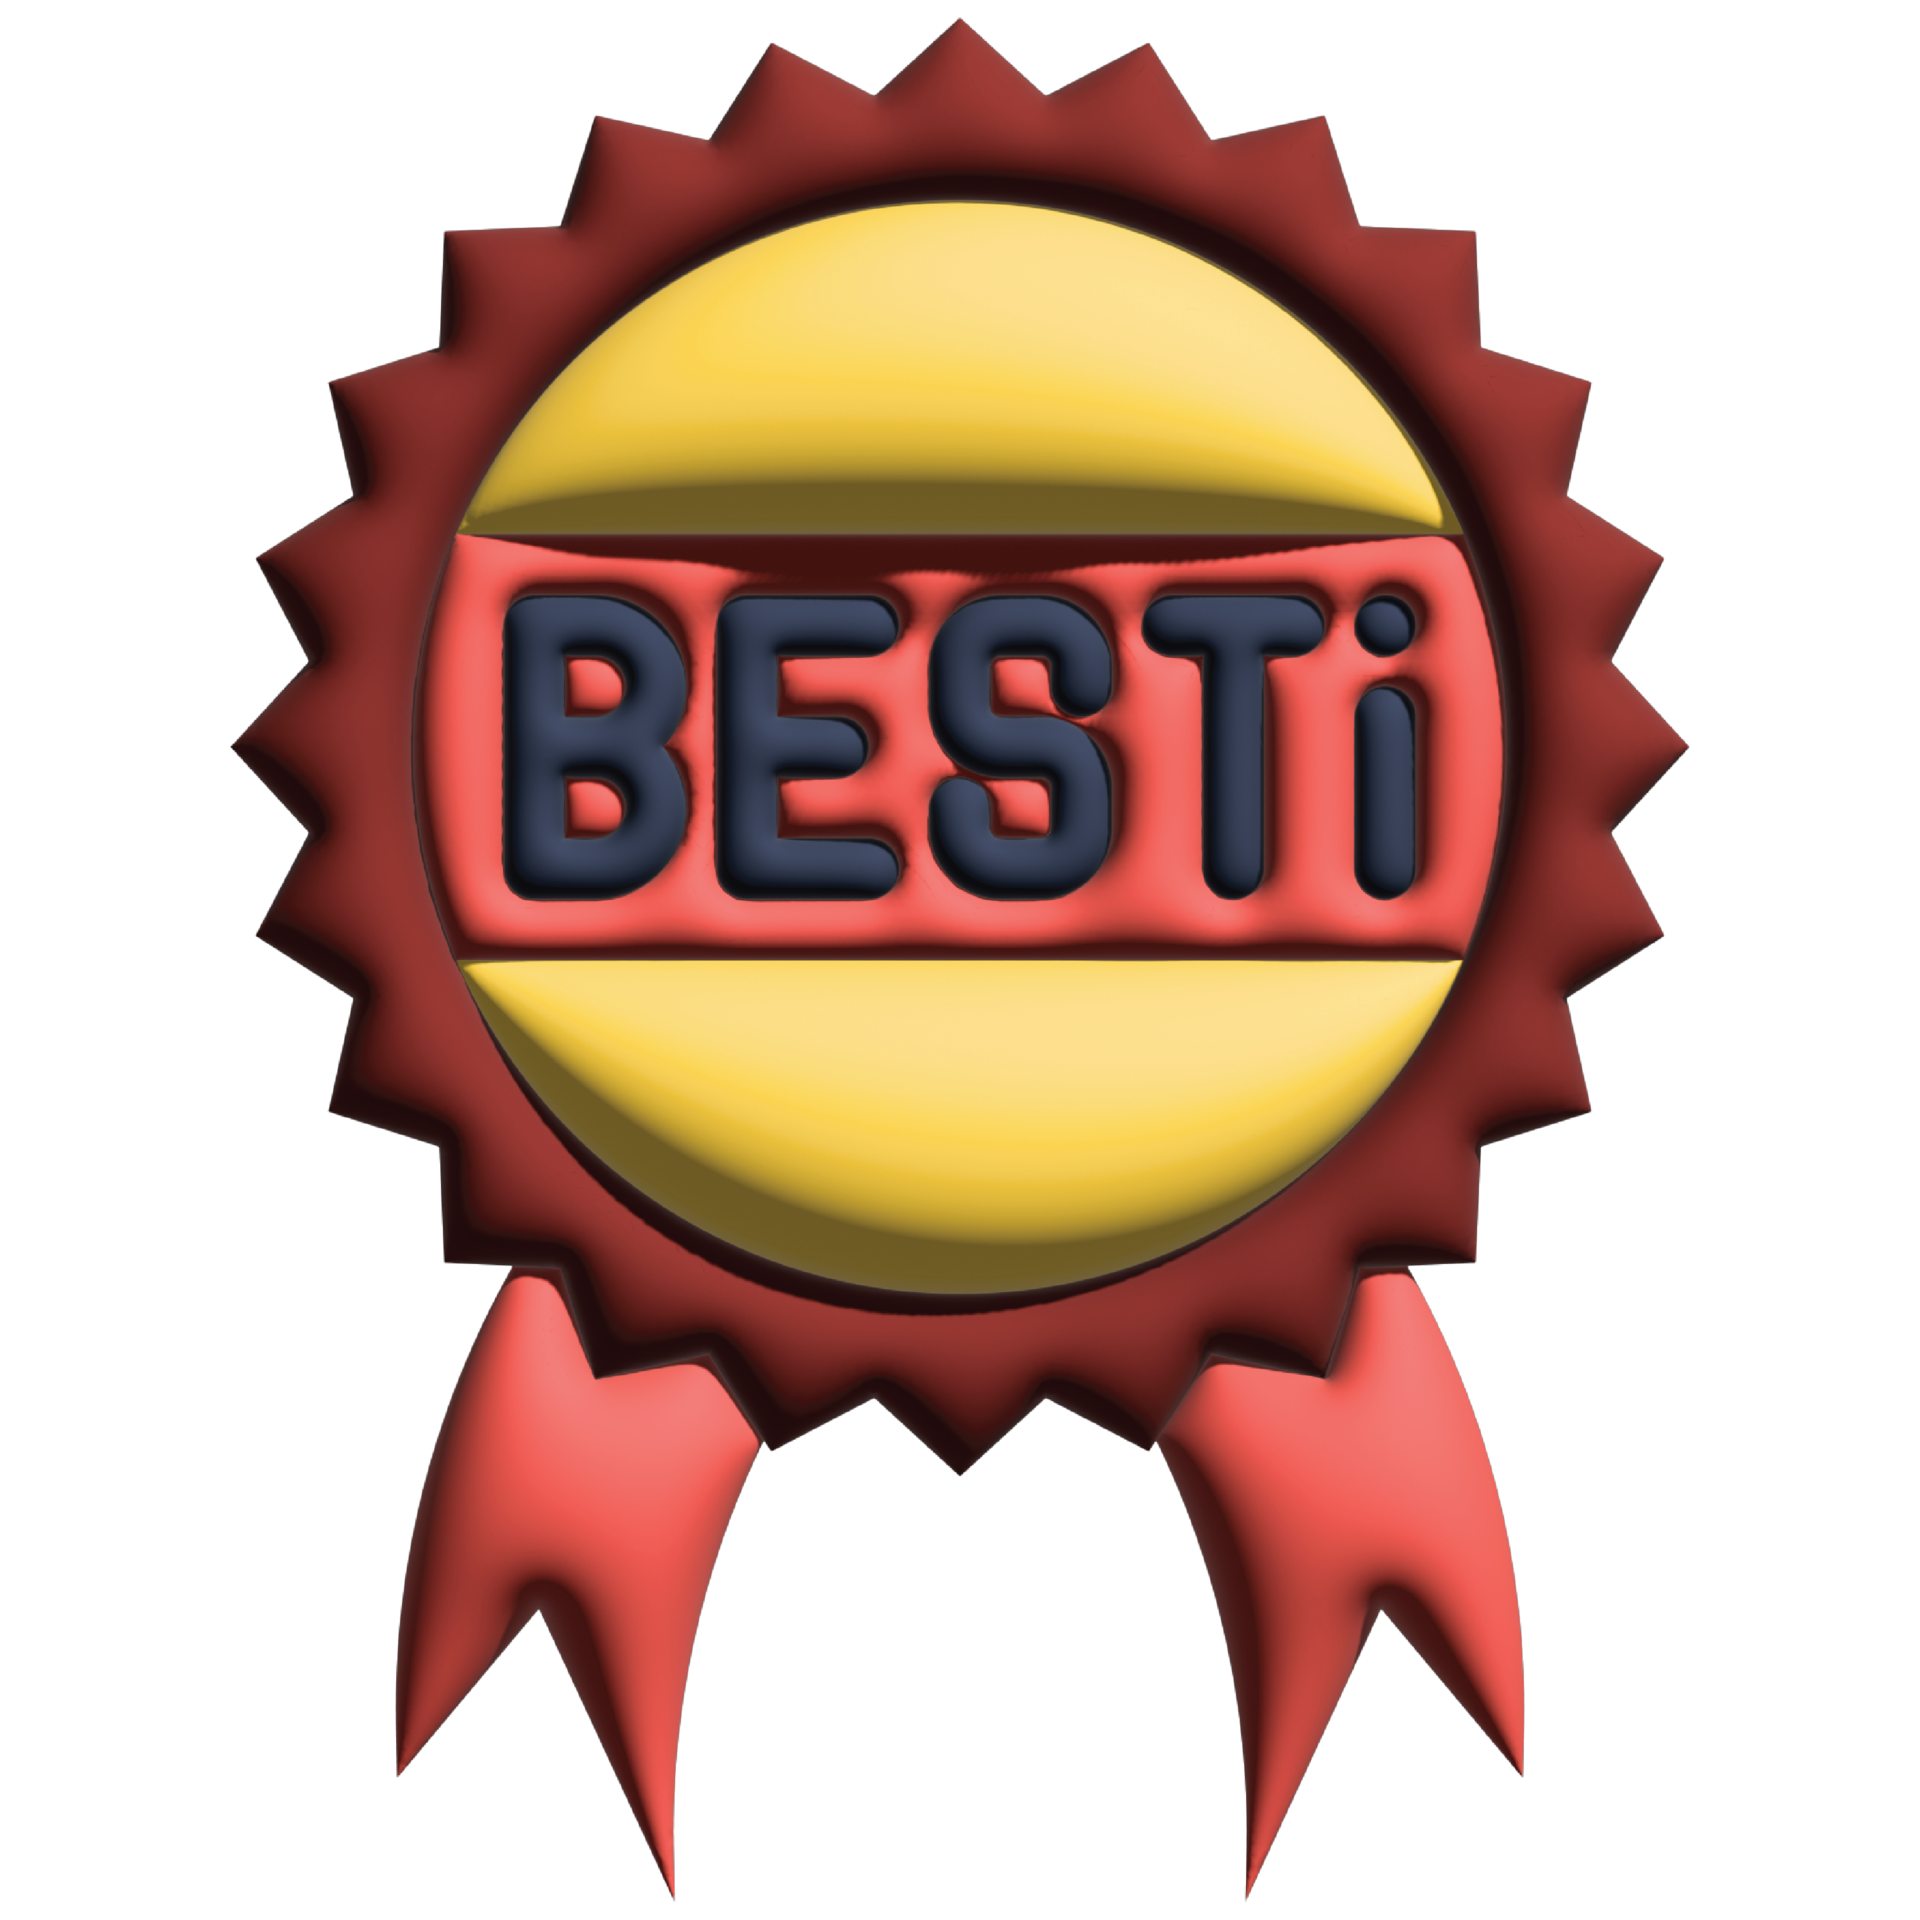 Golden best seller icon symbol sign with red ribbon transparent